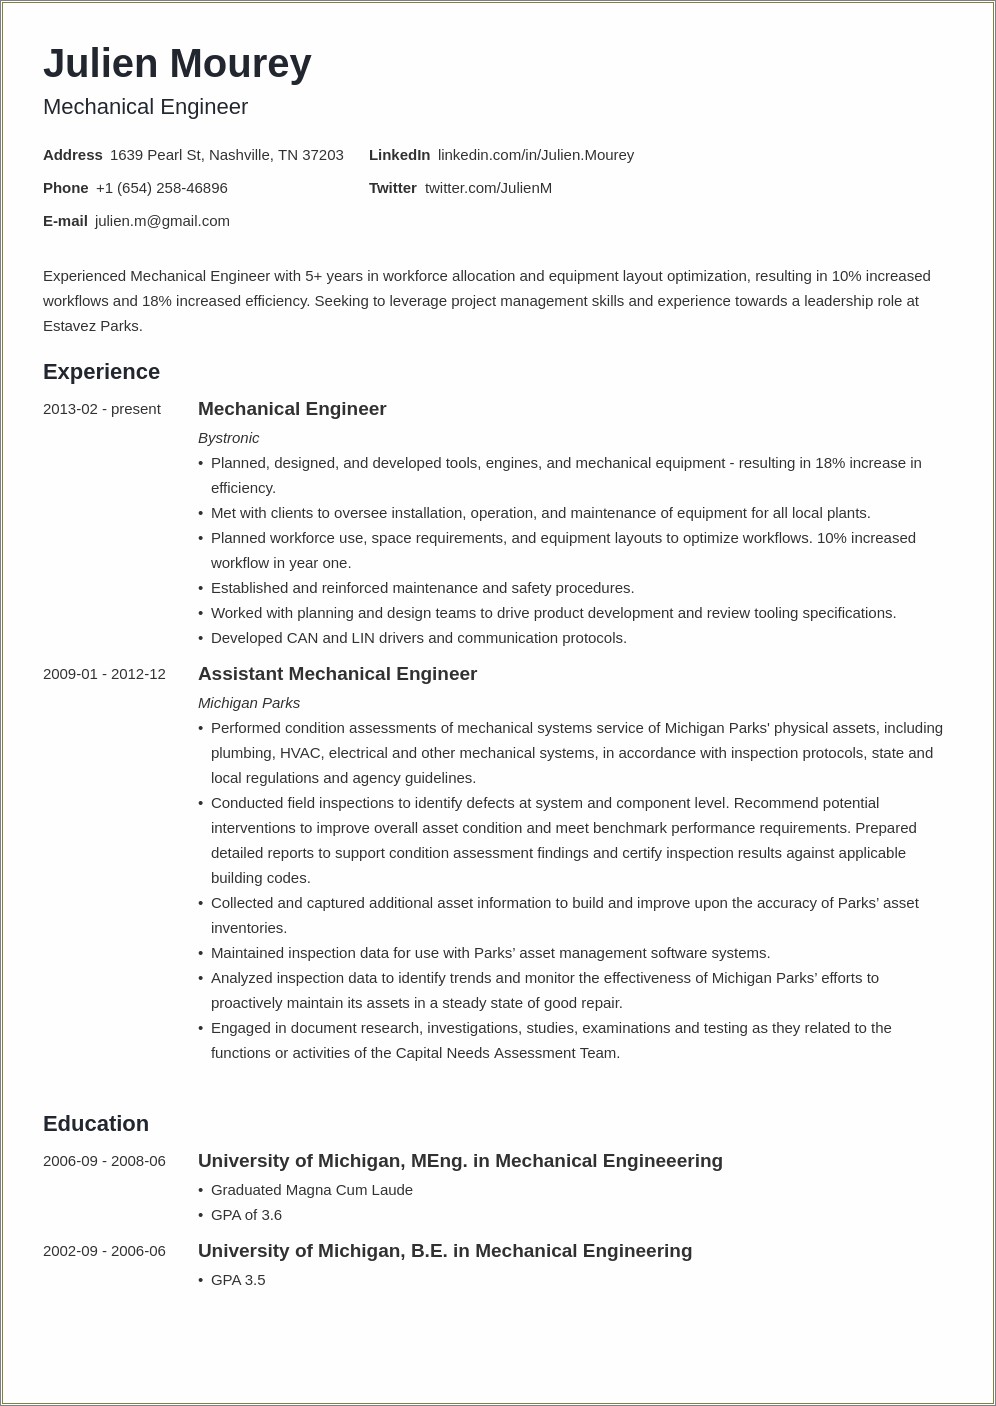 2 Year Experience Resume Format For Design Engineer